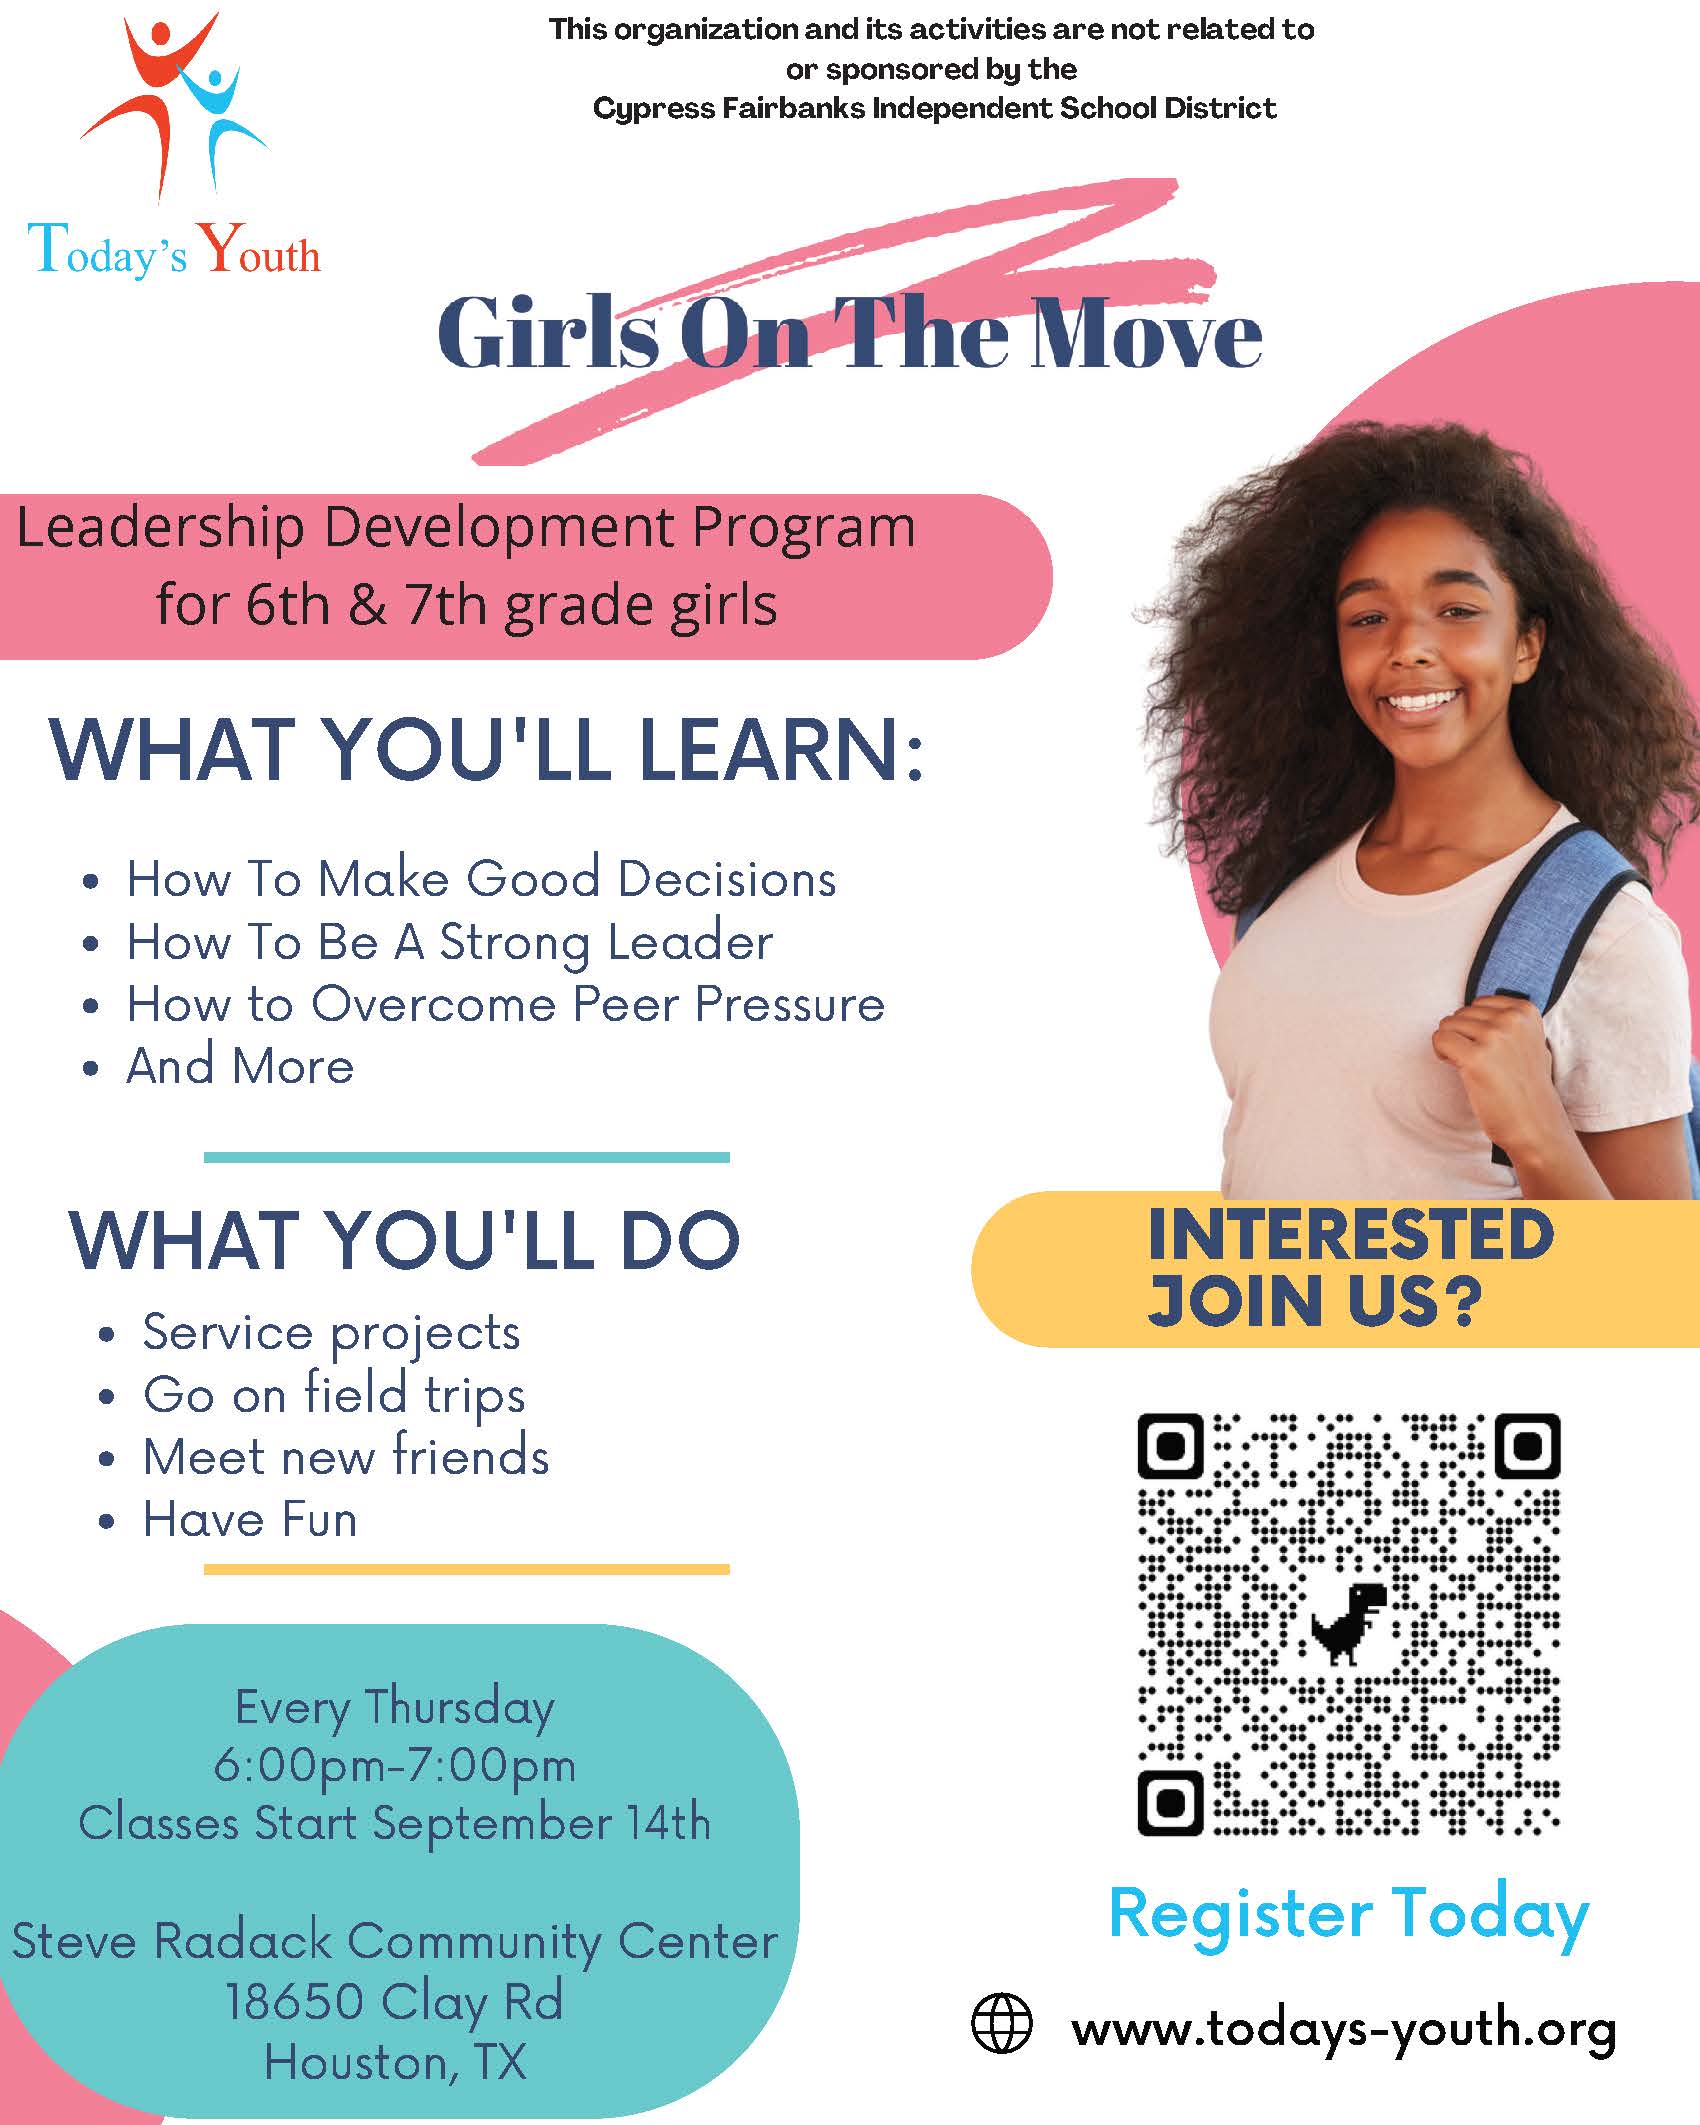 Girls on the Move - Leadership Development Program for 6th & 7th Grade Girls  What you'll learn:  How To Make Good Decisions How To Be A Strong Leader How to Overcome Peer Pressure And More  What you'll do:  Service projects Go on field trips Meet new friends Have Fun  Every Thursday 6-7 p.m. starting Sept. 14 Steve Radack Community Center 18650 Clay Rd Houston, TX  Register online today: www.todays-youth.org  This activity is not related to or sponsored by the Cypress-Fairbanks Independent School District.